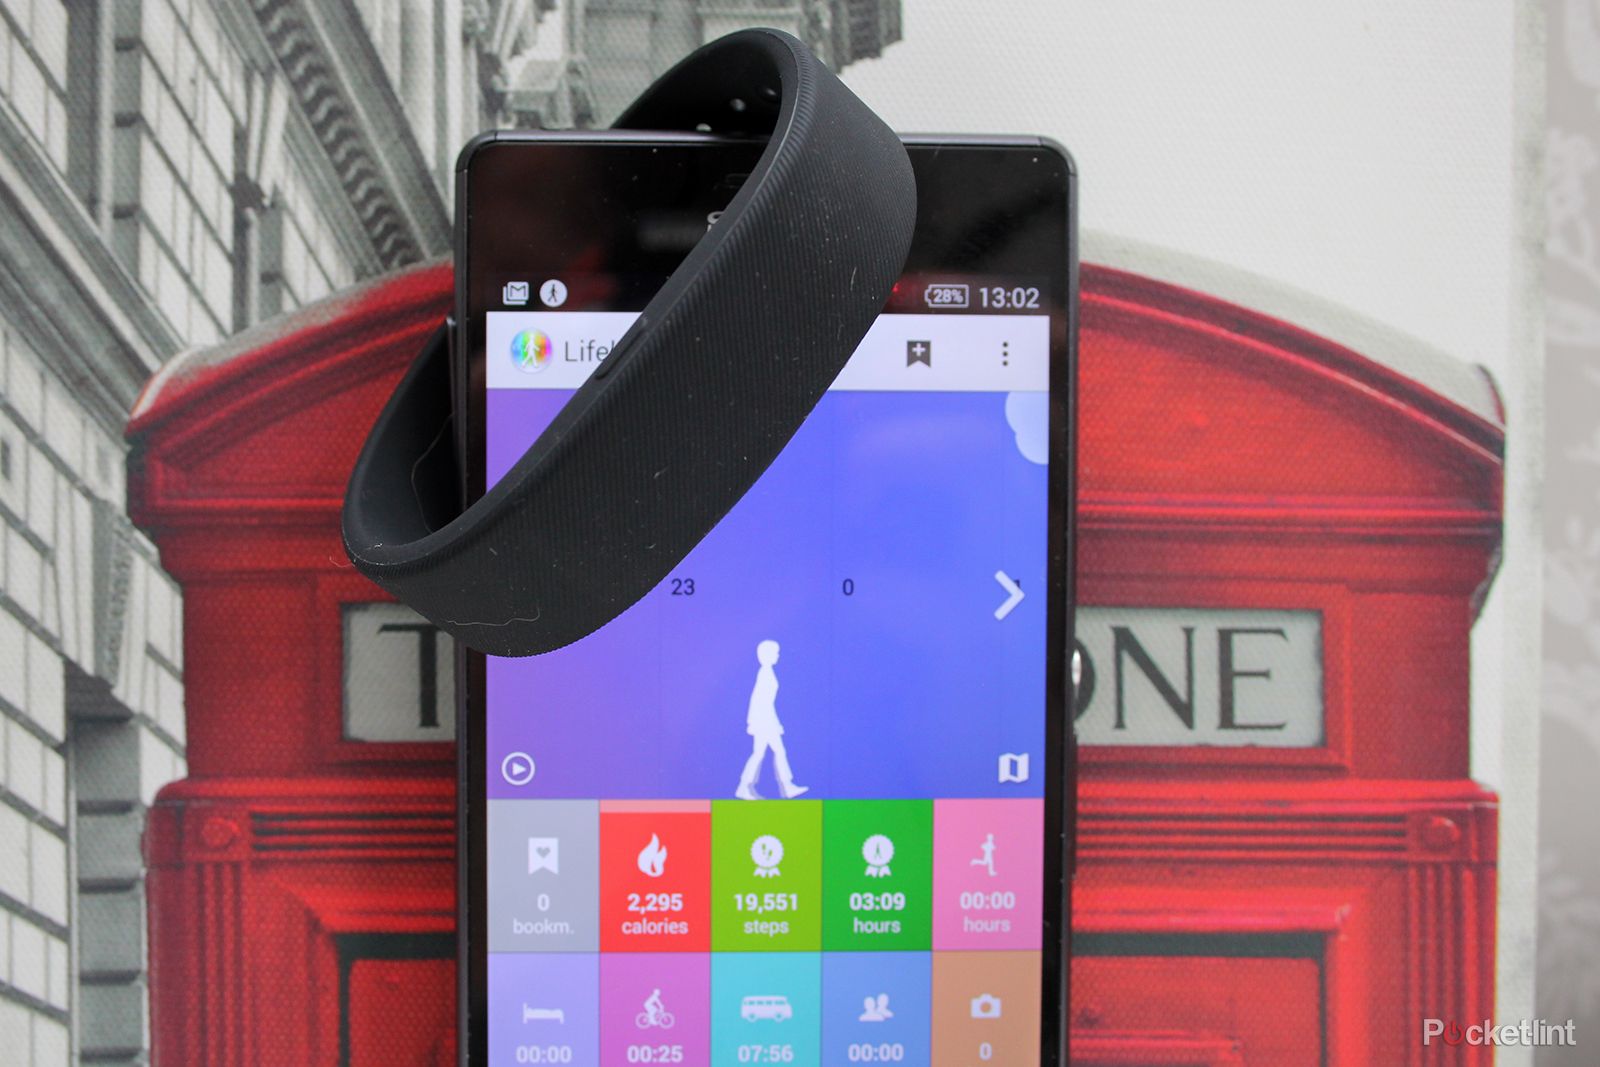 sony smartband review image 1